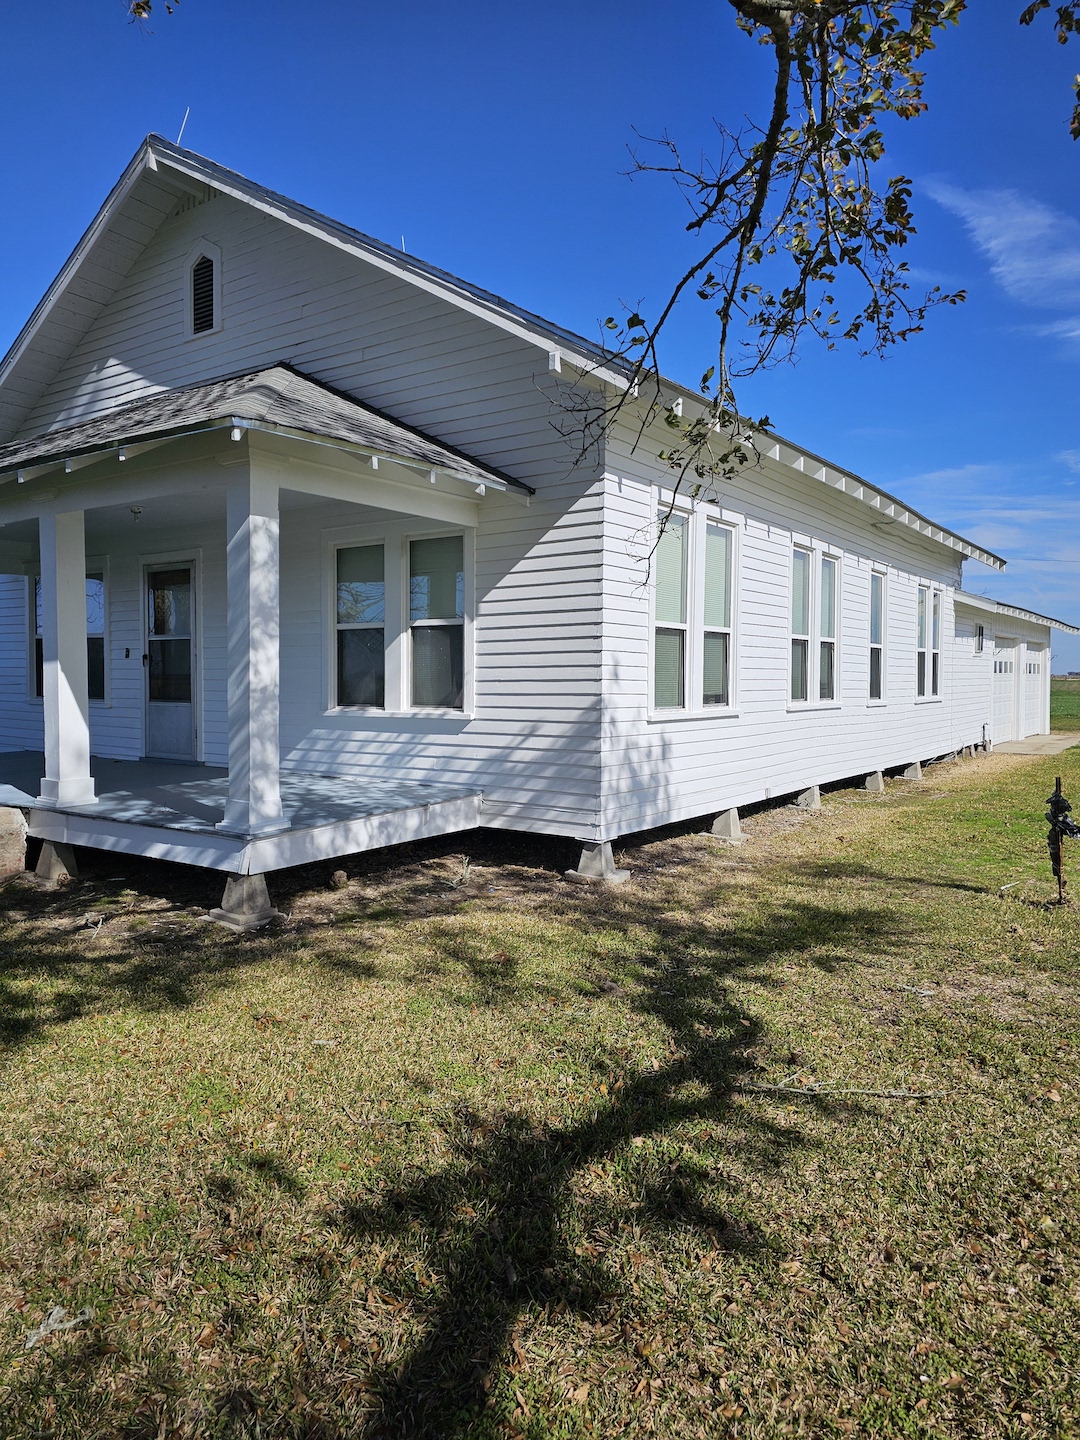 Quality Exterior Painting On An Old Farm House in Welsh, LA Thumbnail